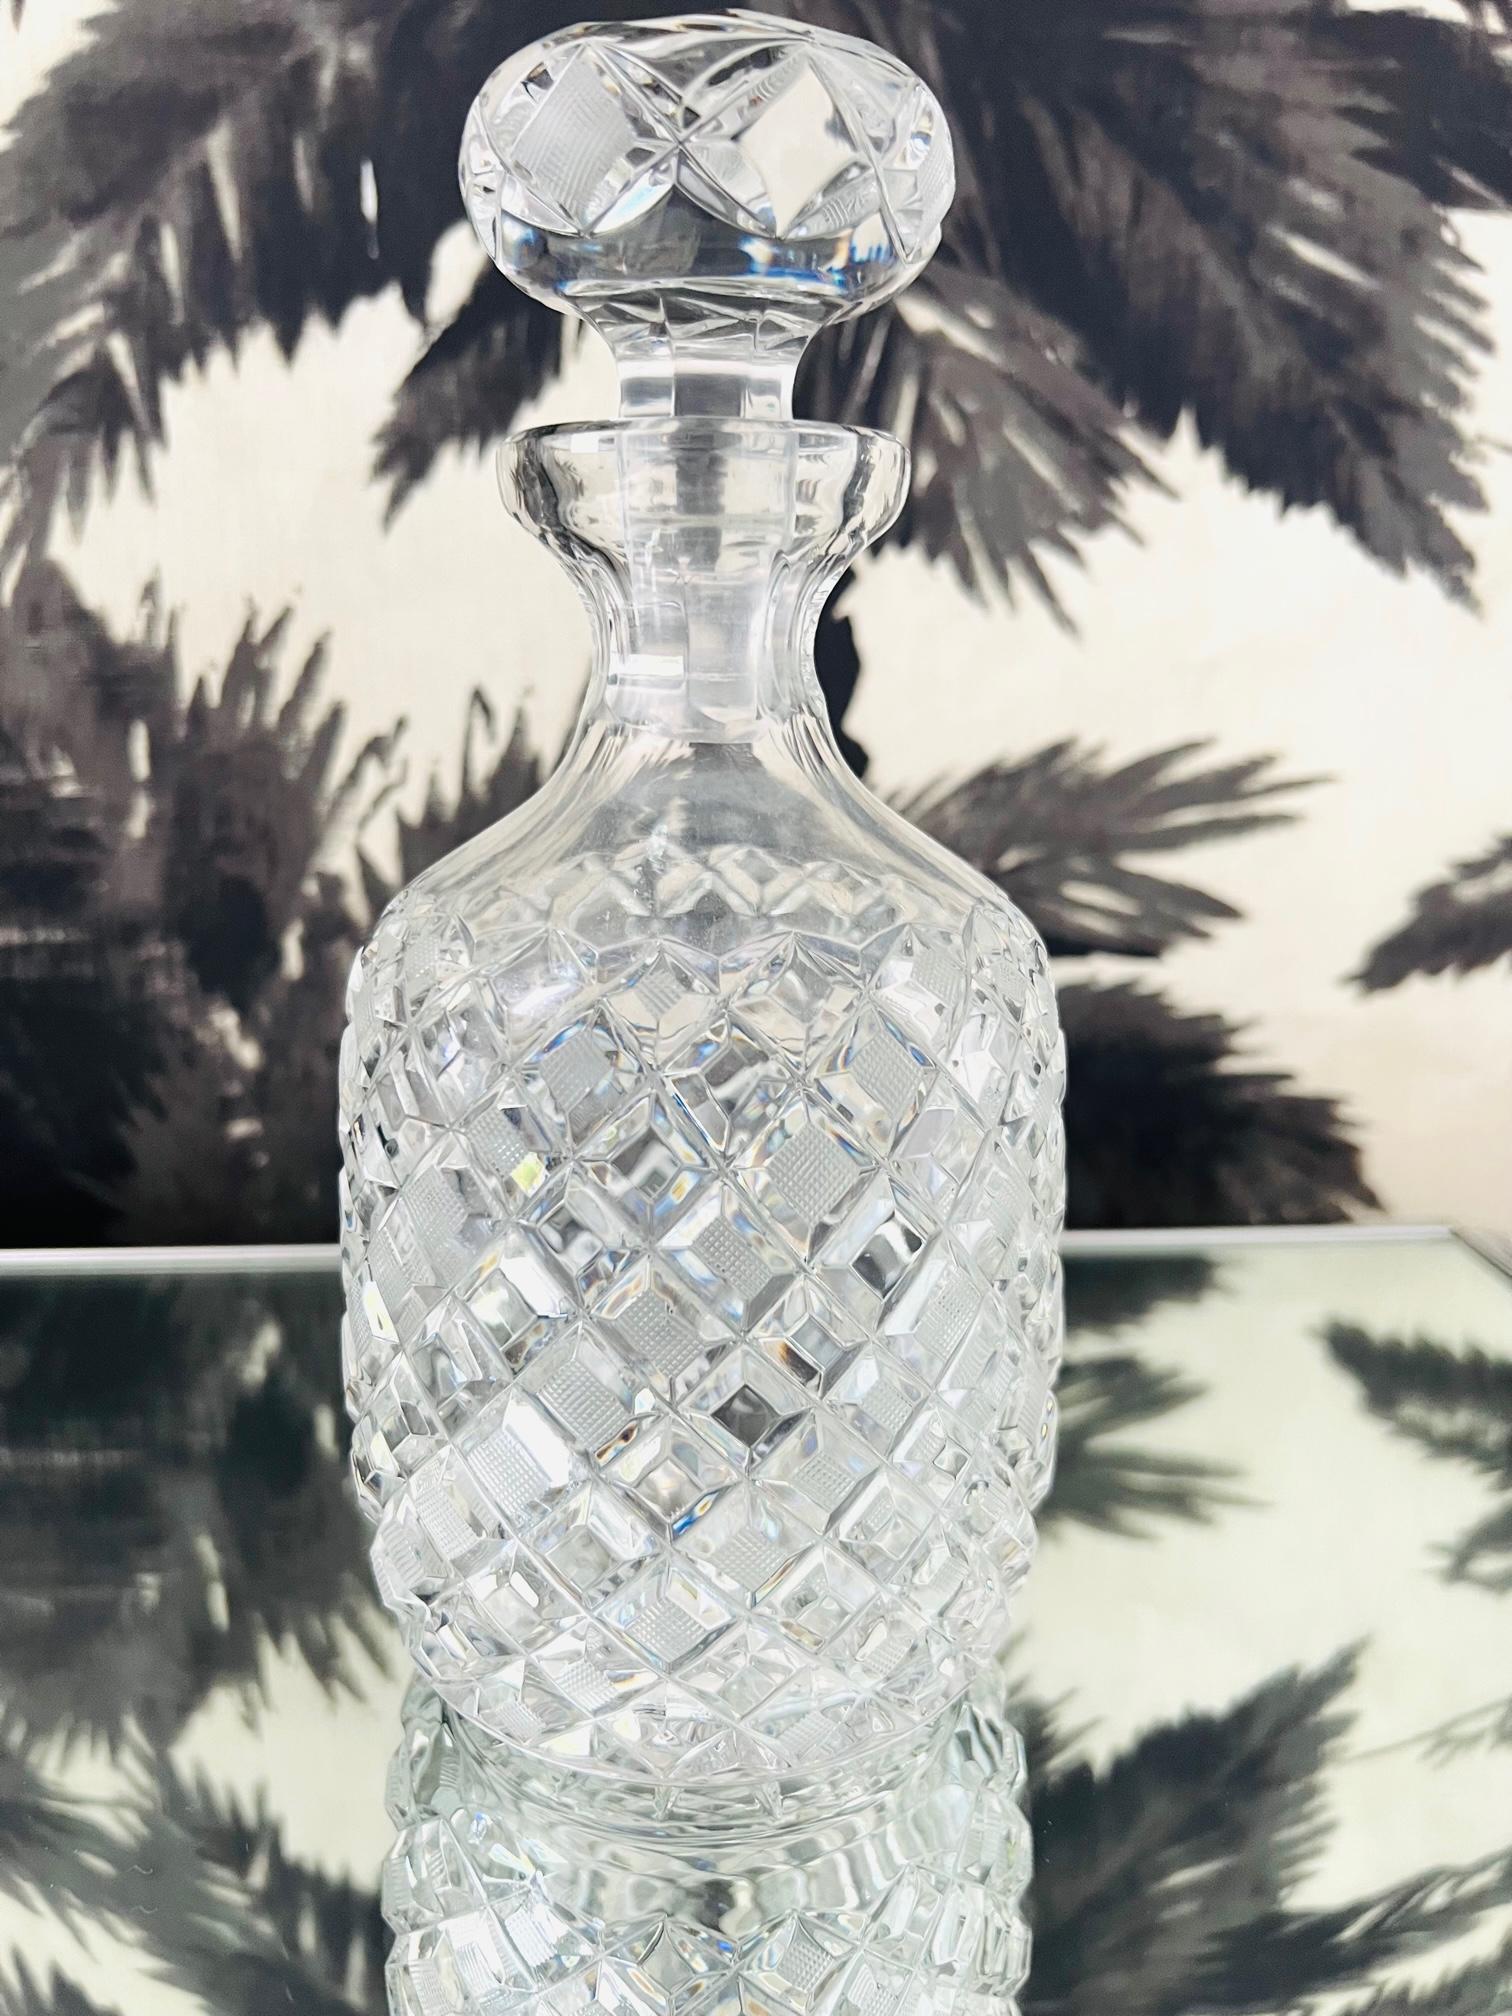 Vintage cross hatched crystal decanter with stopper. The decanter features elegant diamond patterns with both textured and smooth surfaces. The stopper has faceted teardrop designs along the top and echos the diamond pattern of the bottle. The